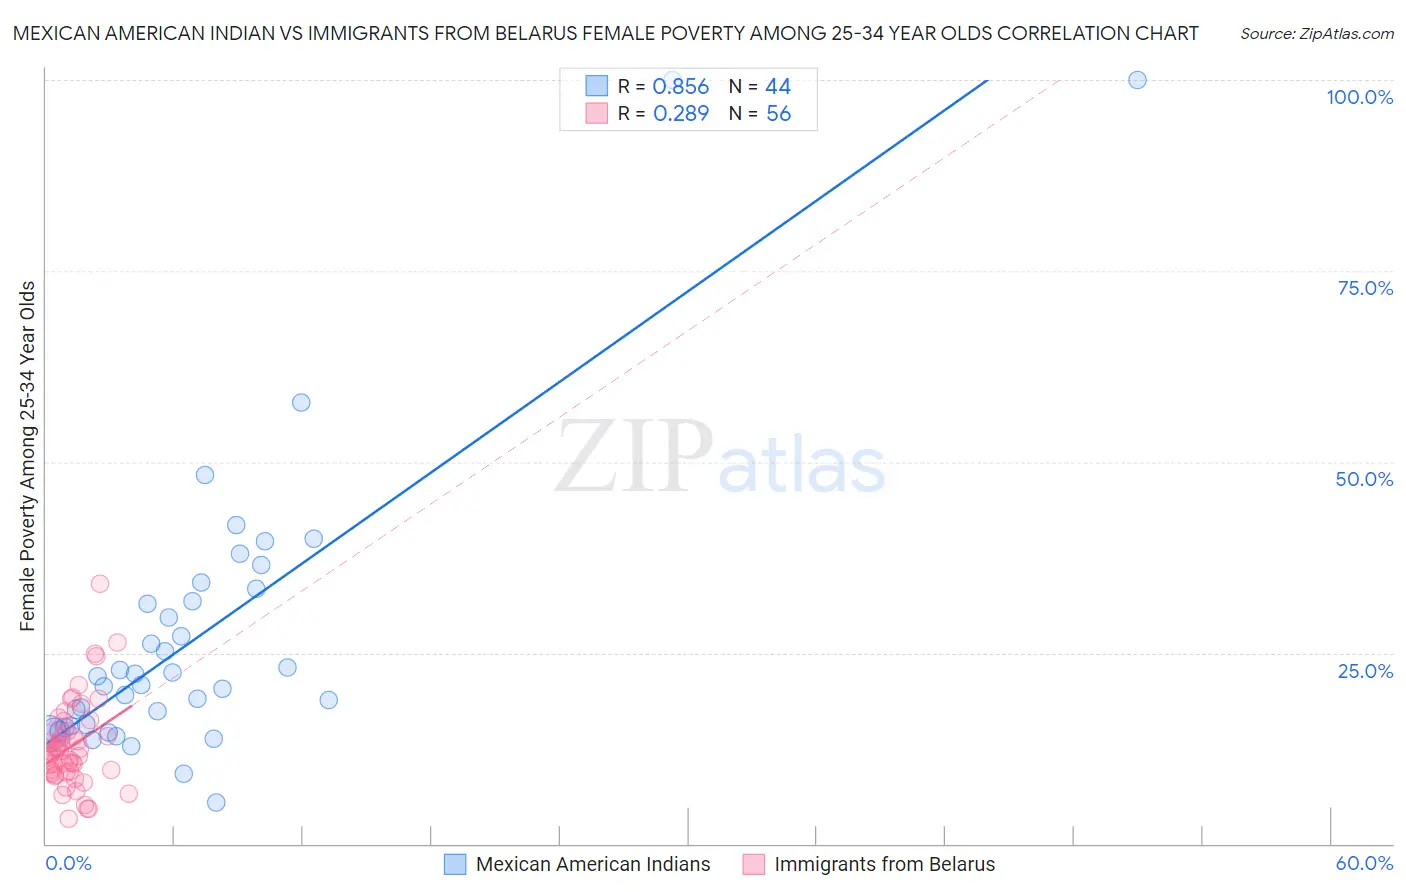 Mexican American Indian vs Immigrants from Belarus Female Poverty Among 25-34 Year Olds